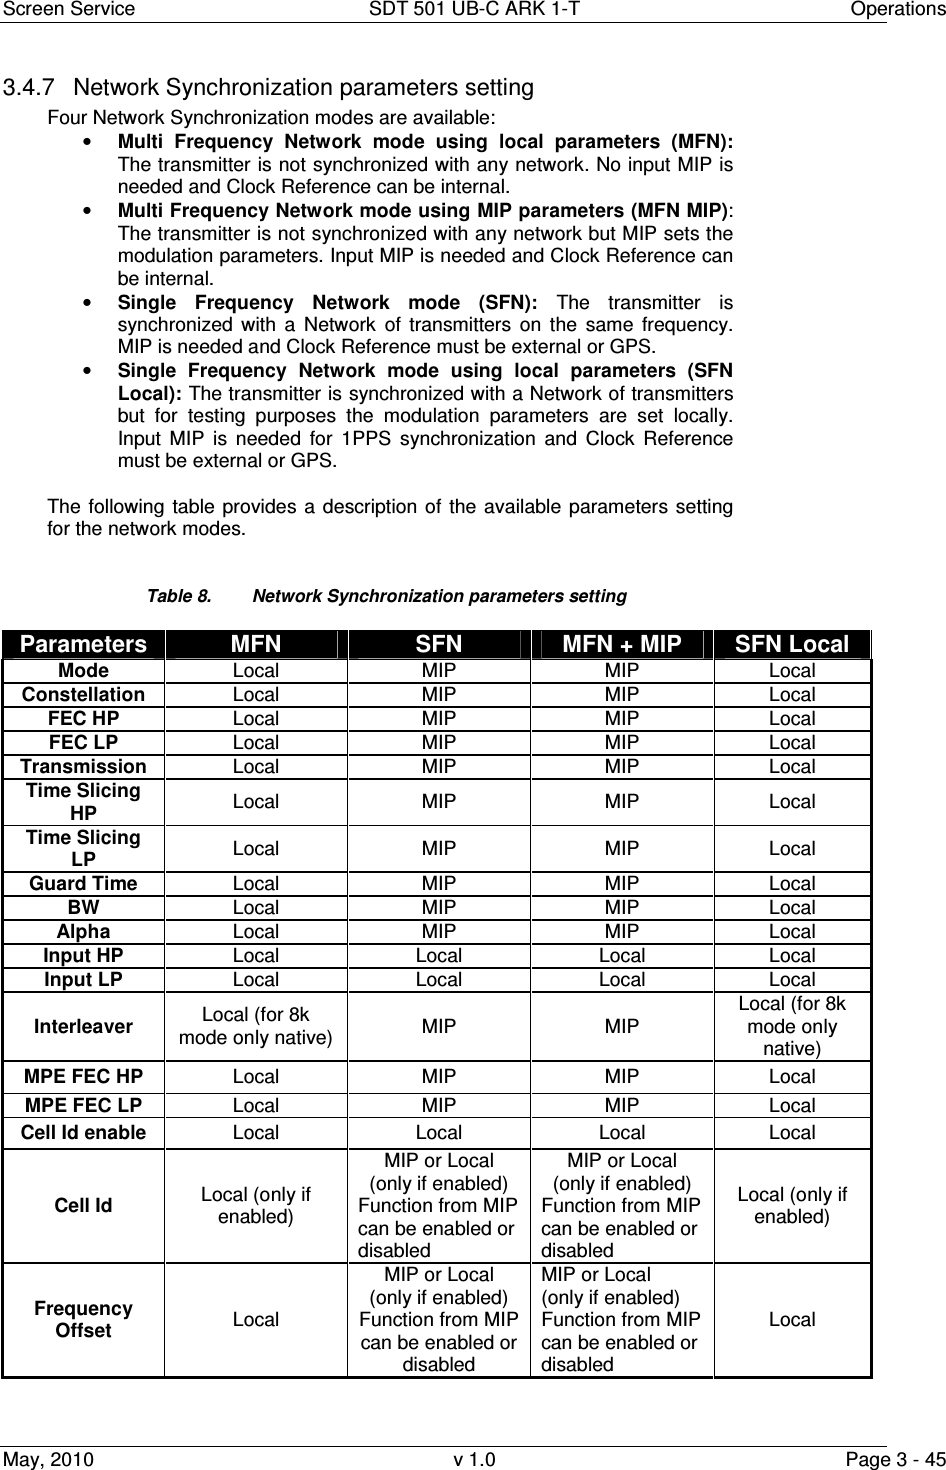 Screen Service  SDT 501 UB-C ARK 1-T  Operations May, 2010  v 1.0  Page 3 - 45 3.4.7  Network Synchronization parameters setting Four Network Synchronization modes are available: • Multi  Frequency  Network  mode  using  local  parameters  (MFN): The transmitter is not synchronized with any network. No input MIP is needed and Clock Reference can be internal. • Multi Frequency Network mode using MIP parameters (MFN MIP): The transmitter is not synchronized with any network but MIP sets the modulation parameters. Input MIP is needed and Clock Reference can be internal. • Single  Frequency  Network  mode  (SFN):  The  transmitter  is synchronized  with  a  Network  of  transmitters  on  the  same  frequency. MIP is needed and Clock Reference must be external or GPS. • Single  Frequency  Network  mode  using  local  parameters  (SFN Local): The transmitter is synchronized with a Network of transmitters but  for  testing  purposes  the  modulation  parameters  are  set  locally. Input  MIP  is  needed  for  1PPS  synchronization  and  Clock  Reference must be external or GPS.  The following  table provides  a  description of the available  parameters  setting for the network modes.  Table 8.  Network Synchronization parameters setting Parameters  MFN  SFN  MFN + MIP  SFN Local Mode  Local  MIP  MIP  Local Constellation  Local  MIP  MIP  Local FEC HP  Local  MIP  MIP  Local FEC LP  Local  MIP  MIP  Local Transmission  Local  MIP  MIP  Local Time Slicing HP  Local  MIP  MIP  Local Time Slicing LP  Local  MIP  MIP  Local Guard Time  Local  MIP  MIP  Local BW  Local  MIP  MIP  Local Alpha  Local  MIP  MIP  Local Input HP  Local  Local  Local  Local Input LP  Local   Local   Local  Local Interleaver  Local (for 8k mode only native)  MIP  MIP Local (for 8k mode only native) MPE FEC HP  Local  MIP  MIP  Local MPE FEC LP  Local  MIP  MIP  Local Cell Id enable  Local  Local  Local  Local Cell Id  Local (only if enabled) MIP or Local  (only if enabled) Function from MIP can be enabled or disabled MIP or Local  (only if enabled) Function from MIP can be enabled or disabled Local (only if enabled) Frequency Offset  Local MIP or Local  (only if enabled) Function from MIP can be enabled or disabled MIP or Local  (only if enabled) Function from MIP can be enabled or disabled Local 